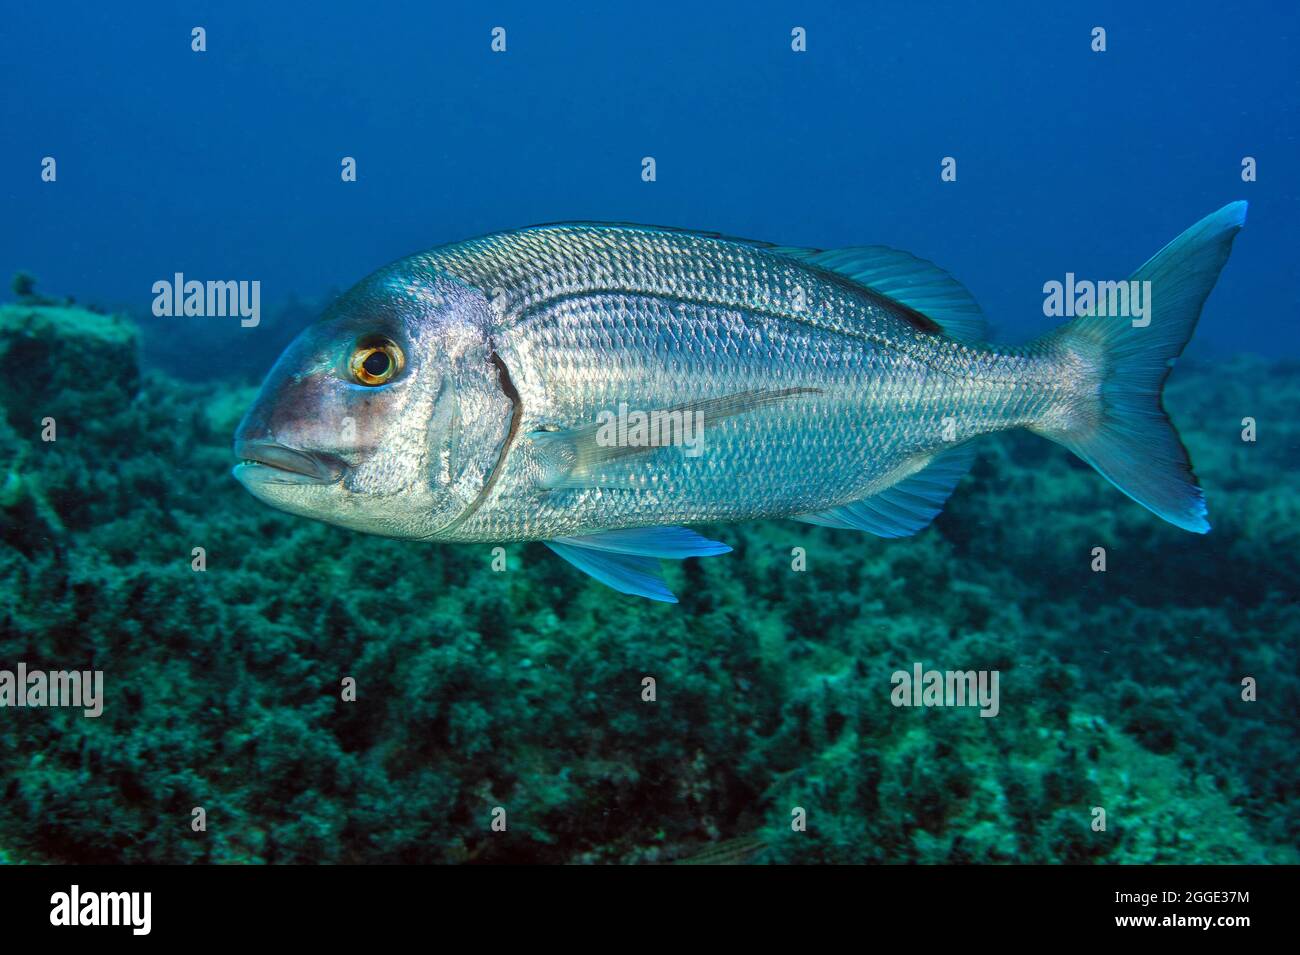 Common Red porgy (Pagrus pagrus), Eastern Atlantic, Canary Islands, Spain Stock Photo